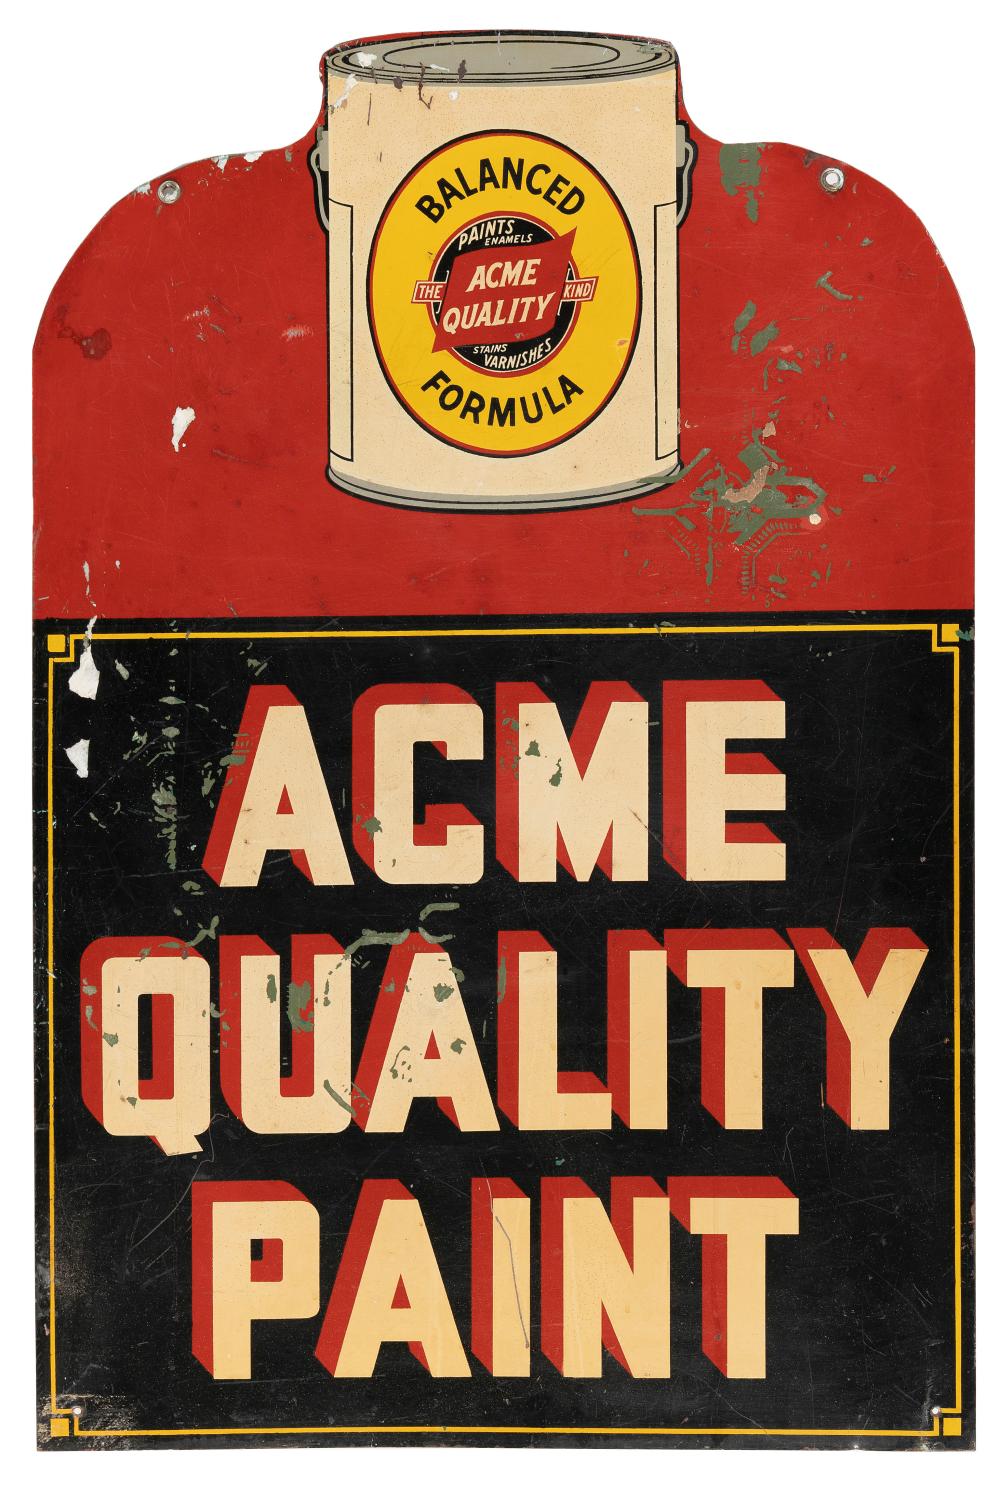 “ACME QUALITY PAINT” DOUBLE-SIDED